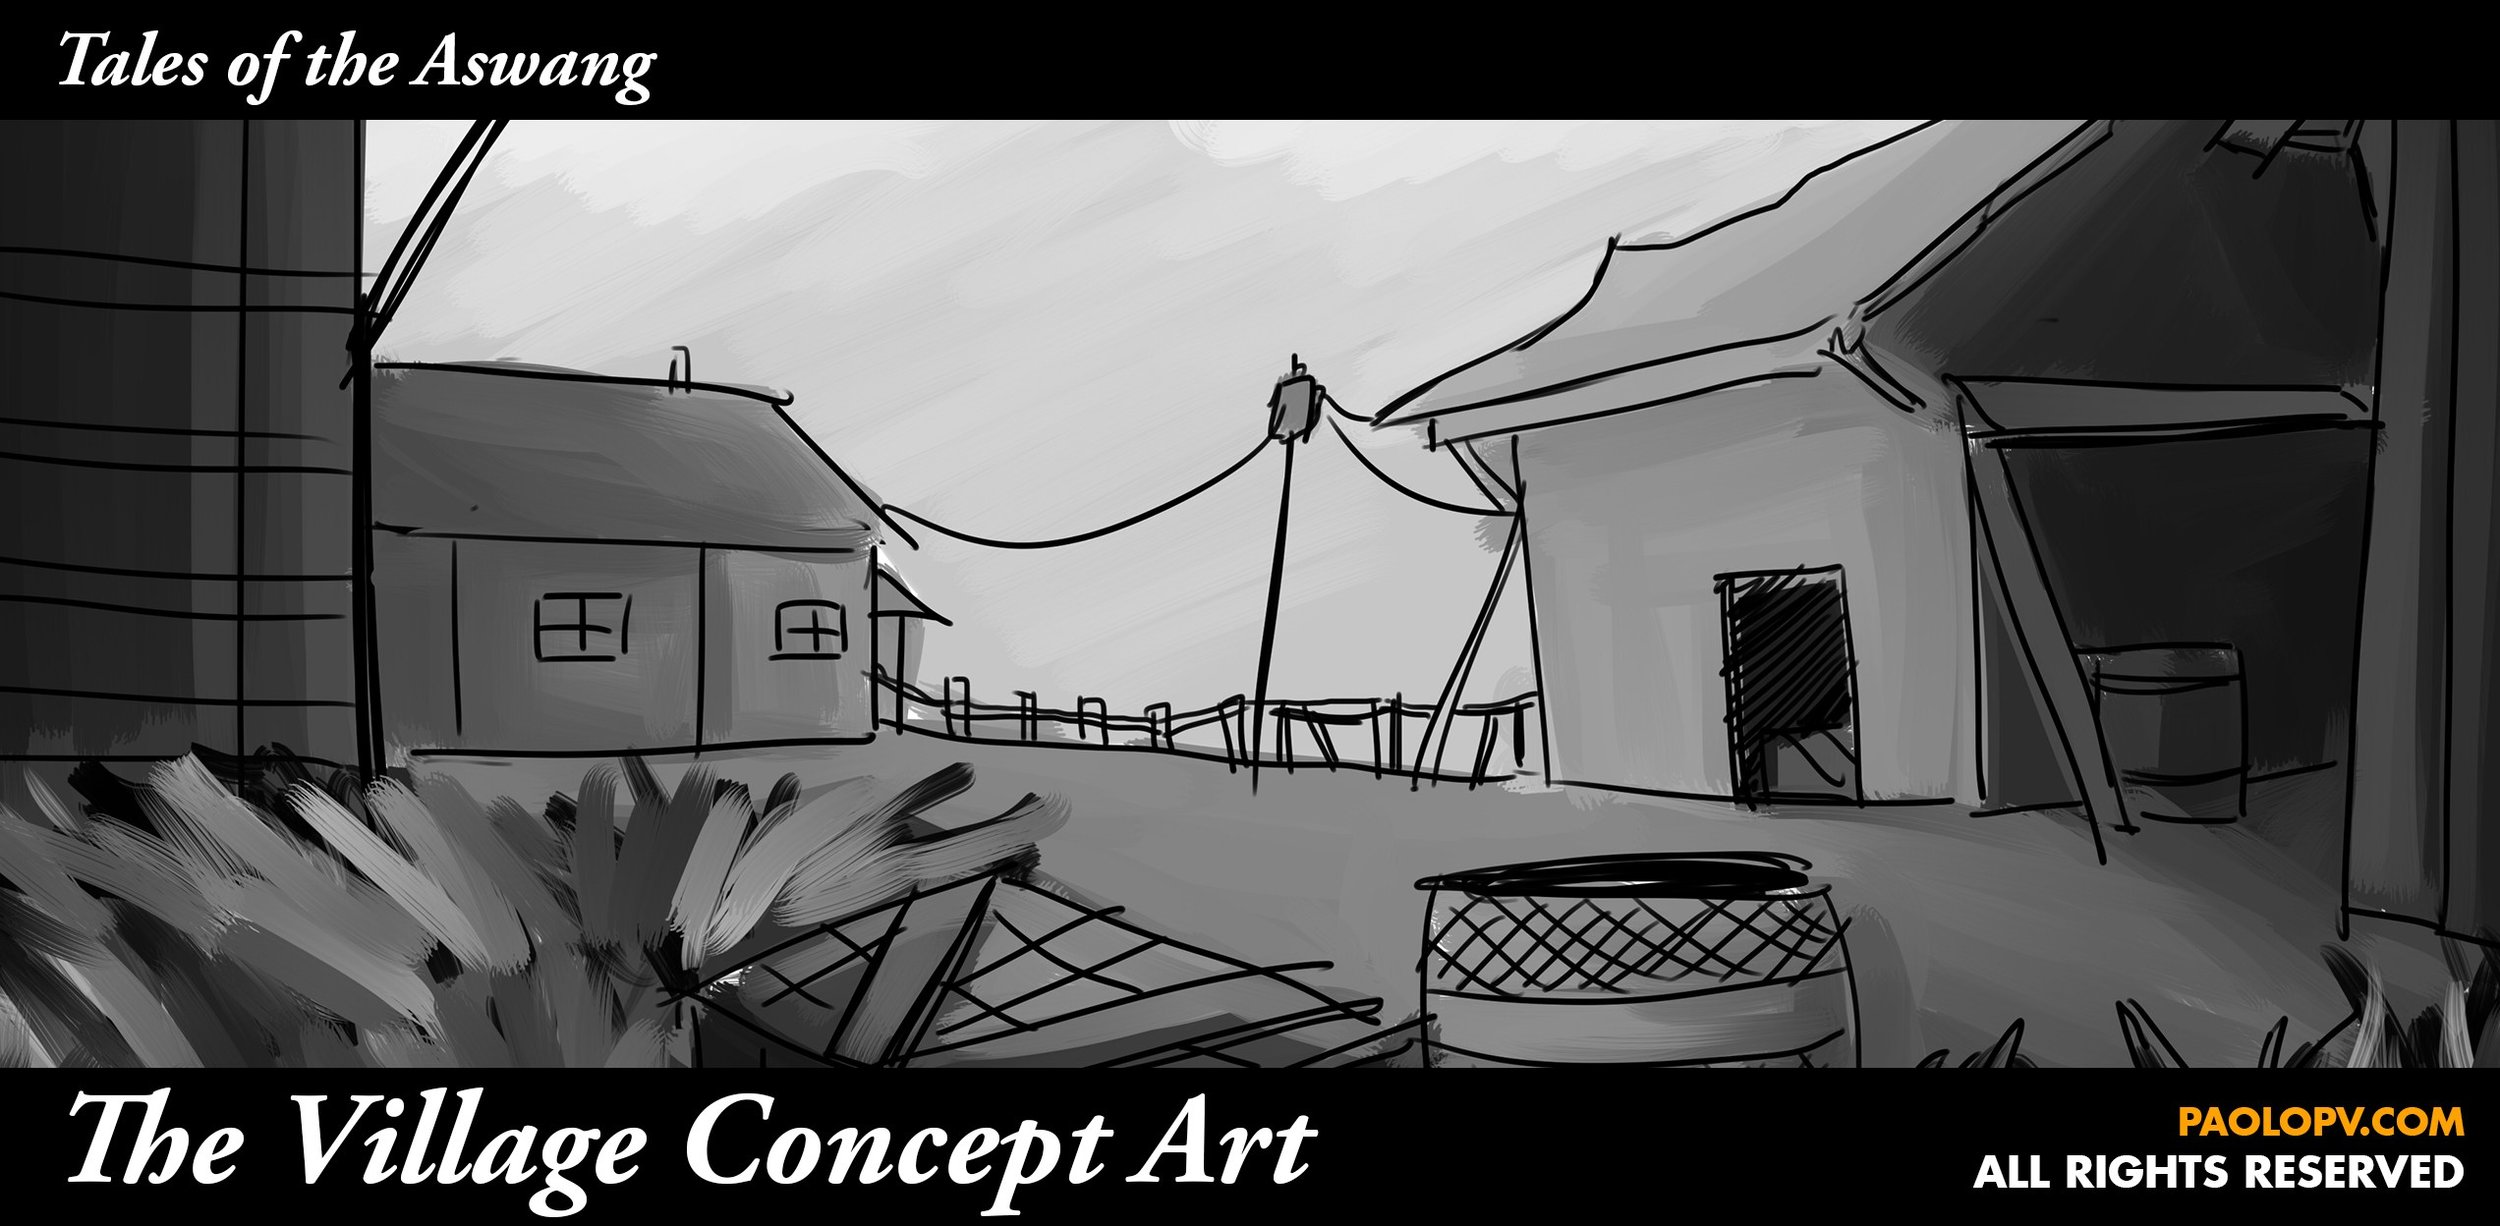 Tales-of-the-Aswang-Concept-Art-The-Village.jpg